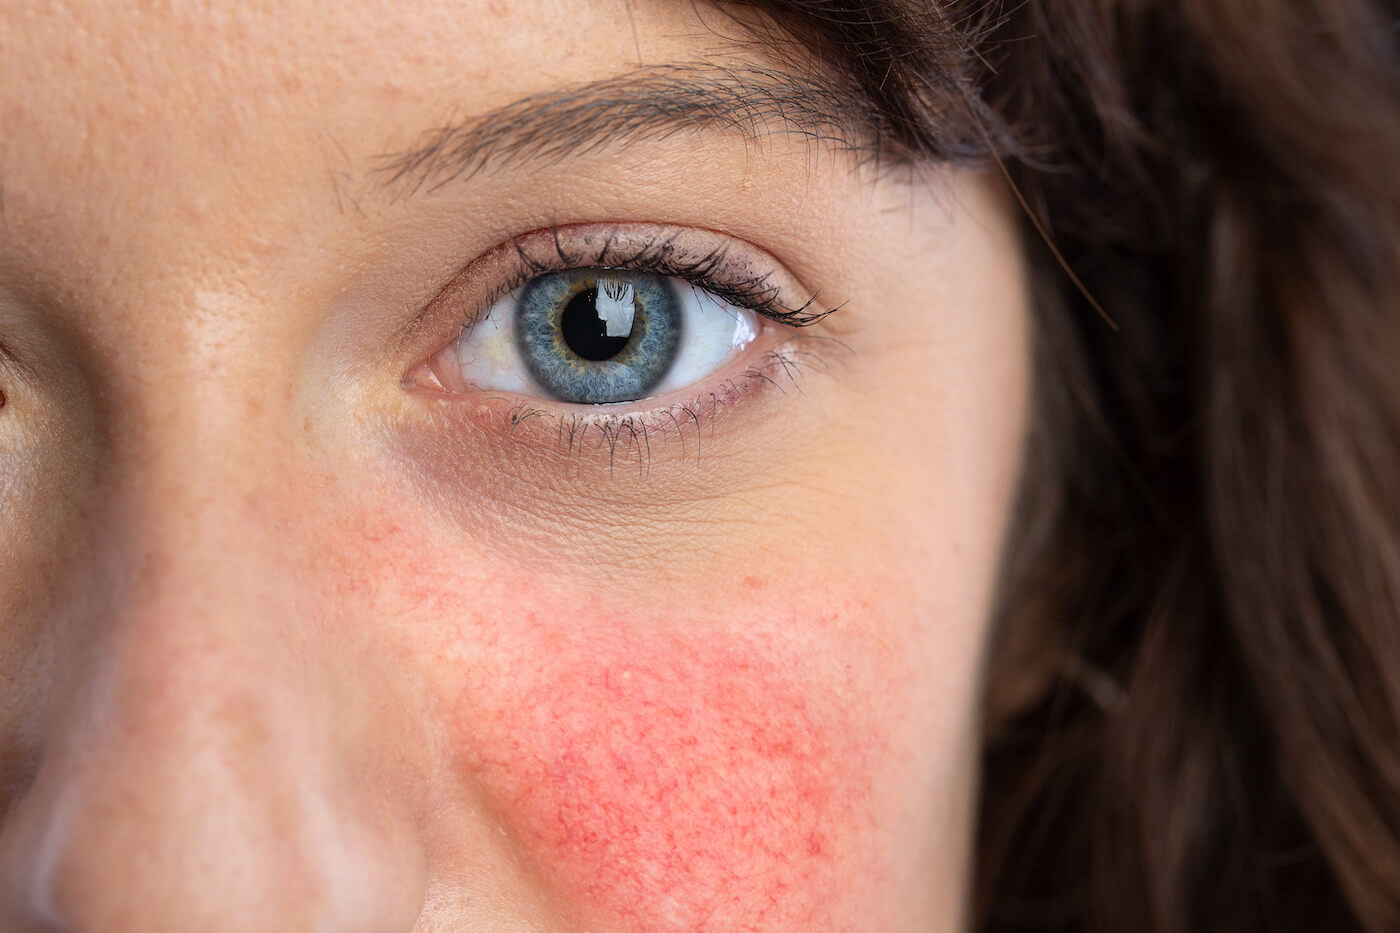 type 1 rosacea redness and visible blood vessels on woman's cheeks.